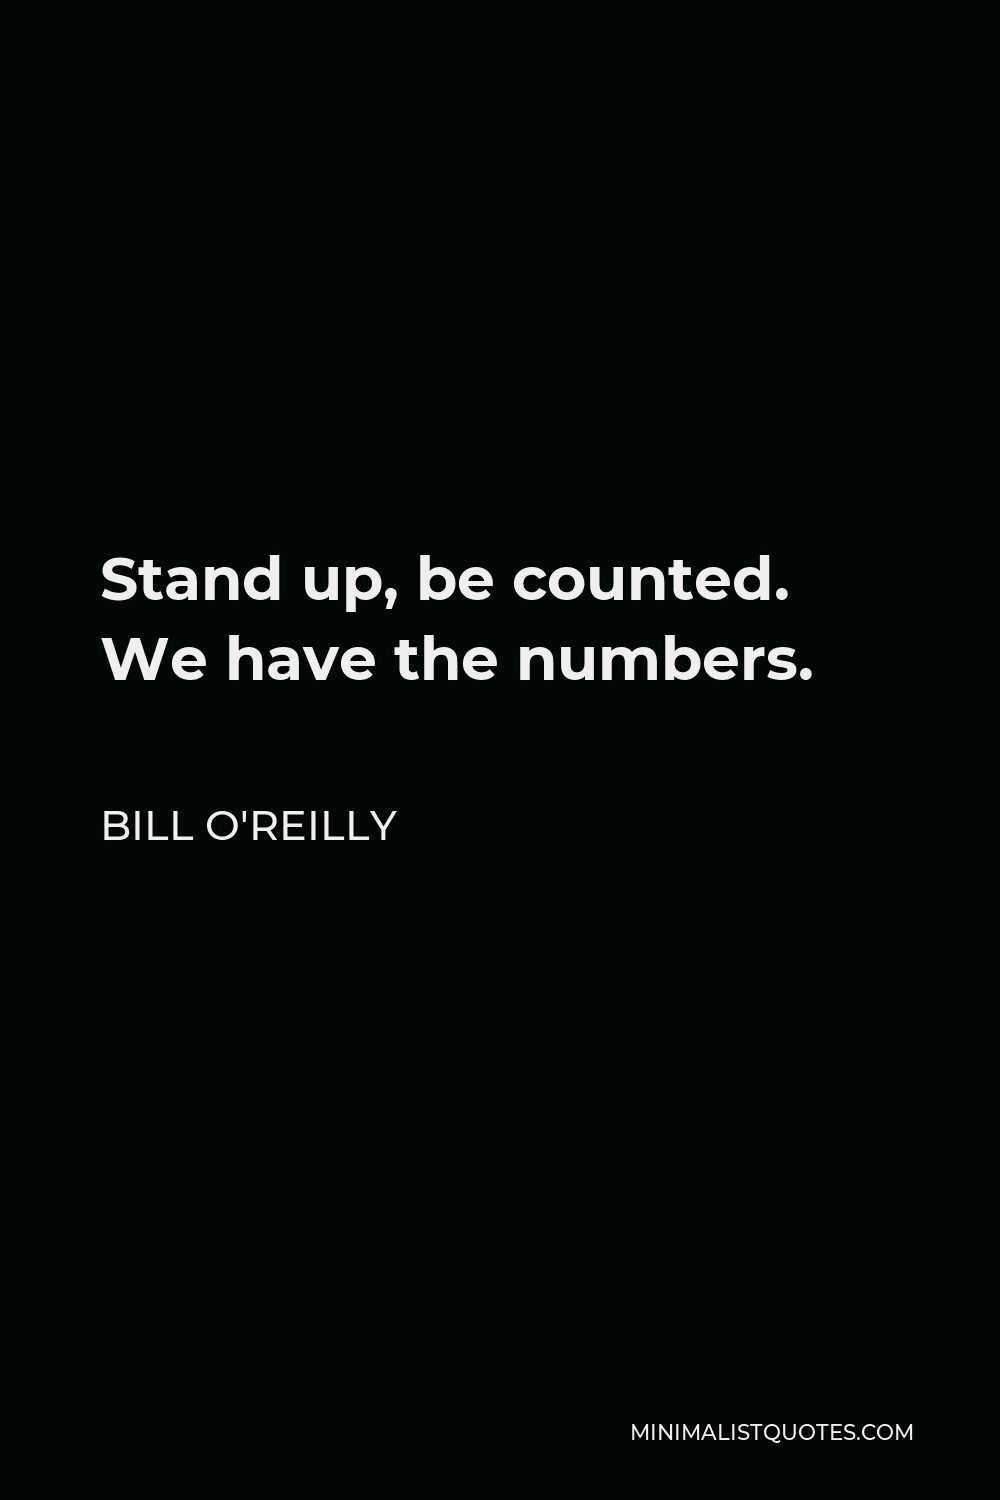 Bill O'Reilly Quote - Stand up, be counted. We have the numbers.